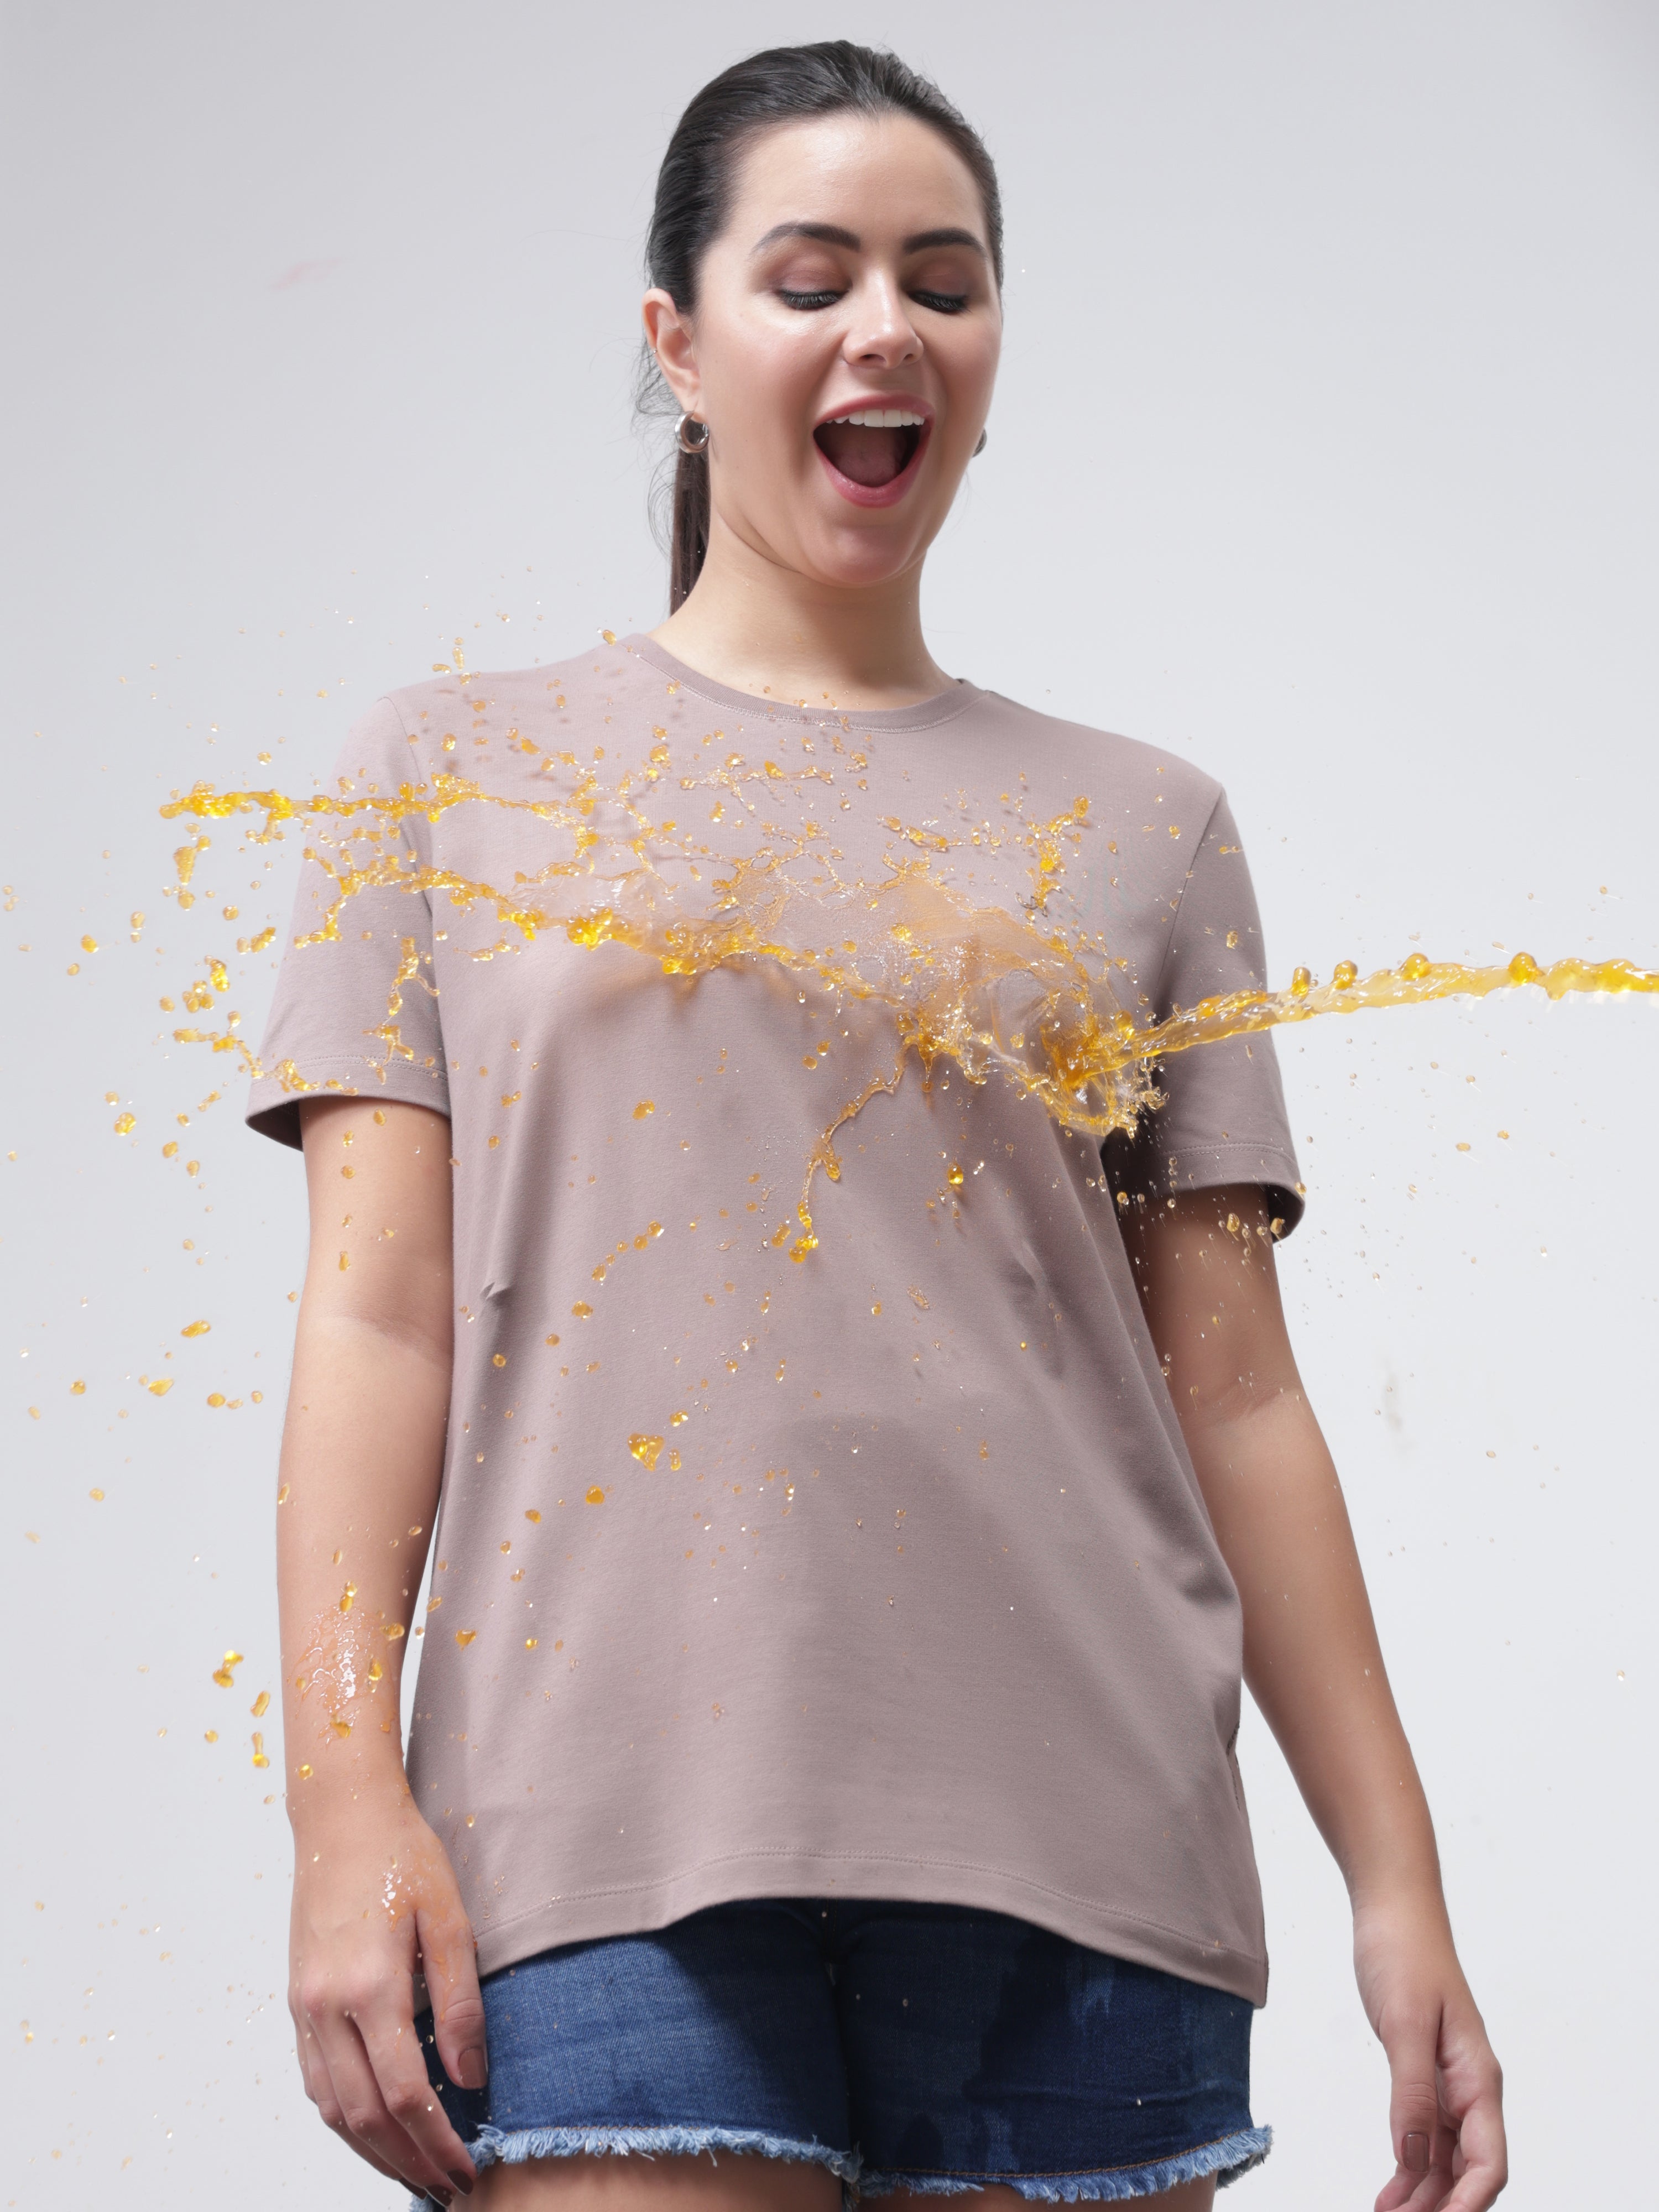 Woman wearing a Dusky Maroon stain-proof, anti-odor, stretchable Turms T-shirt with tailored fit, repelling liquid stains with ease.